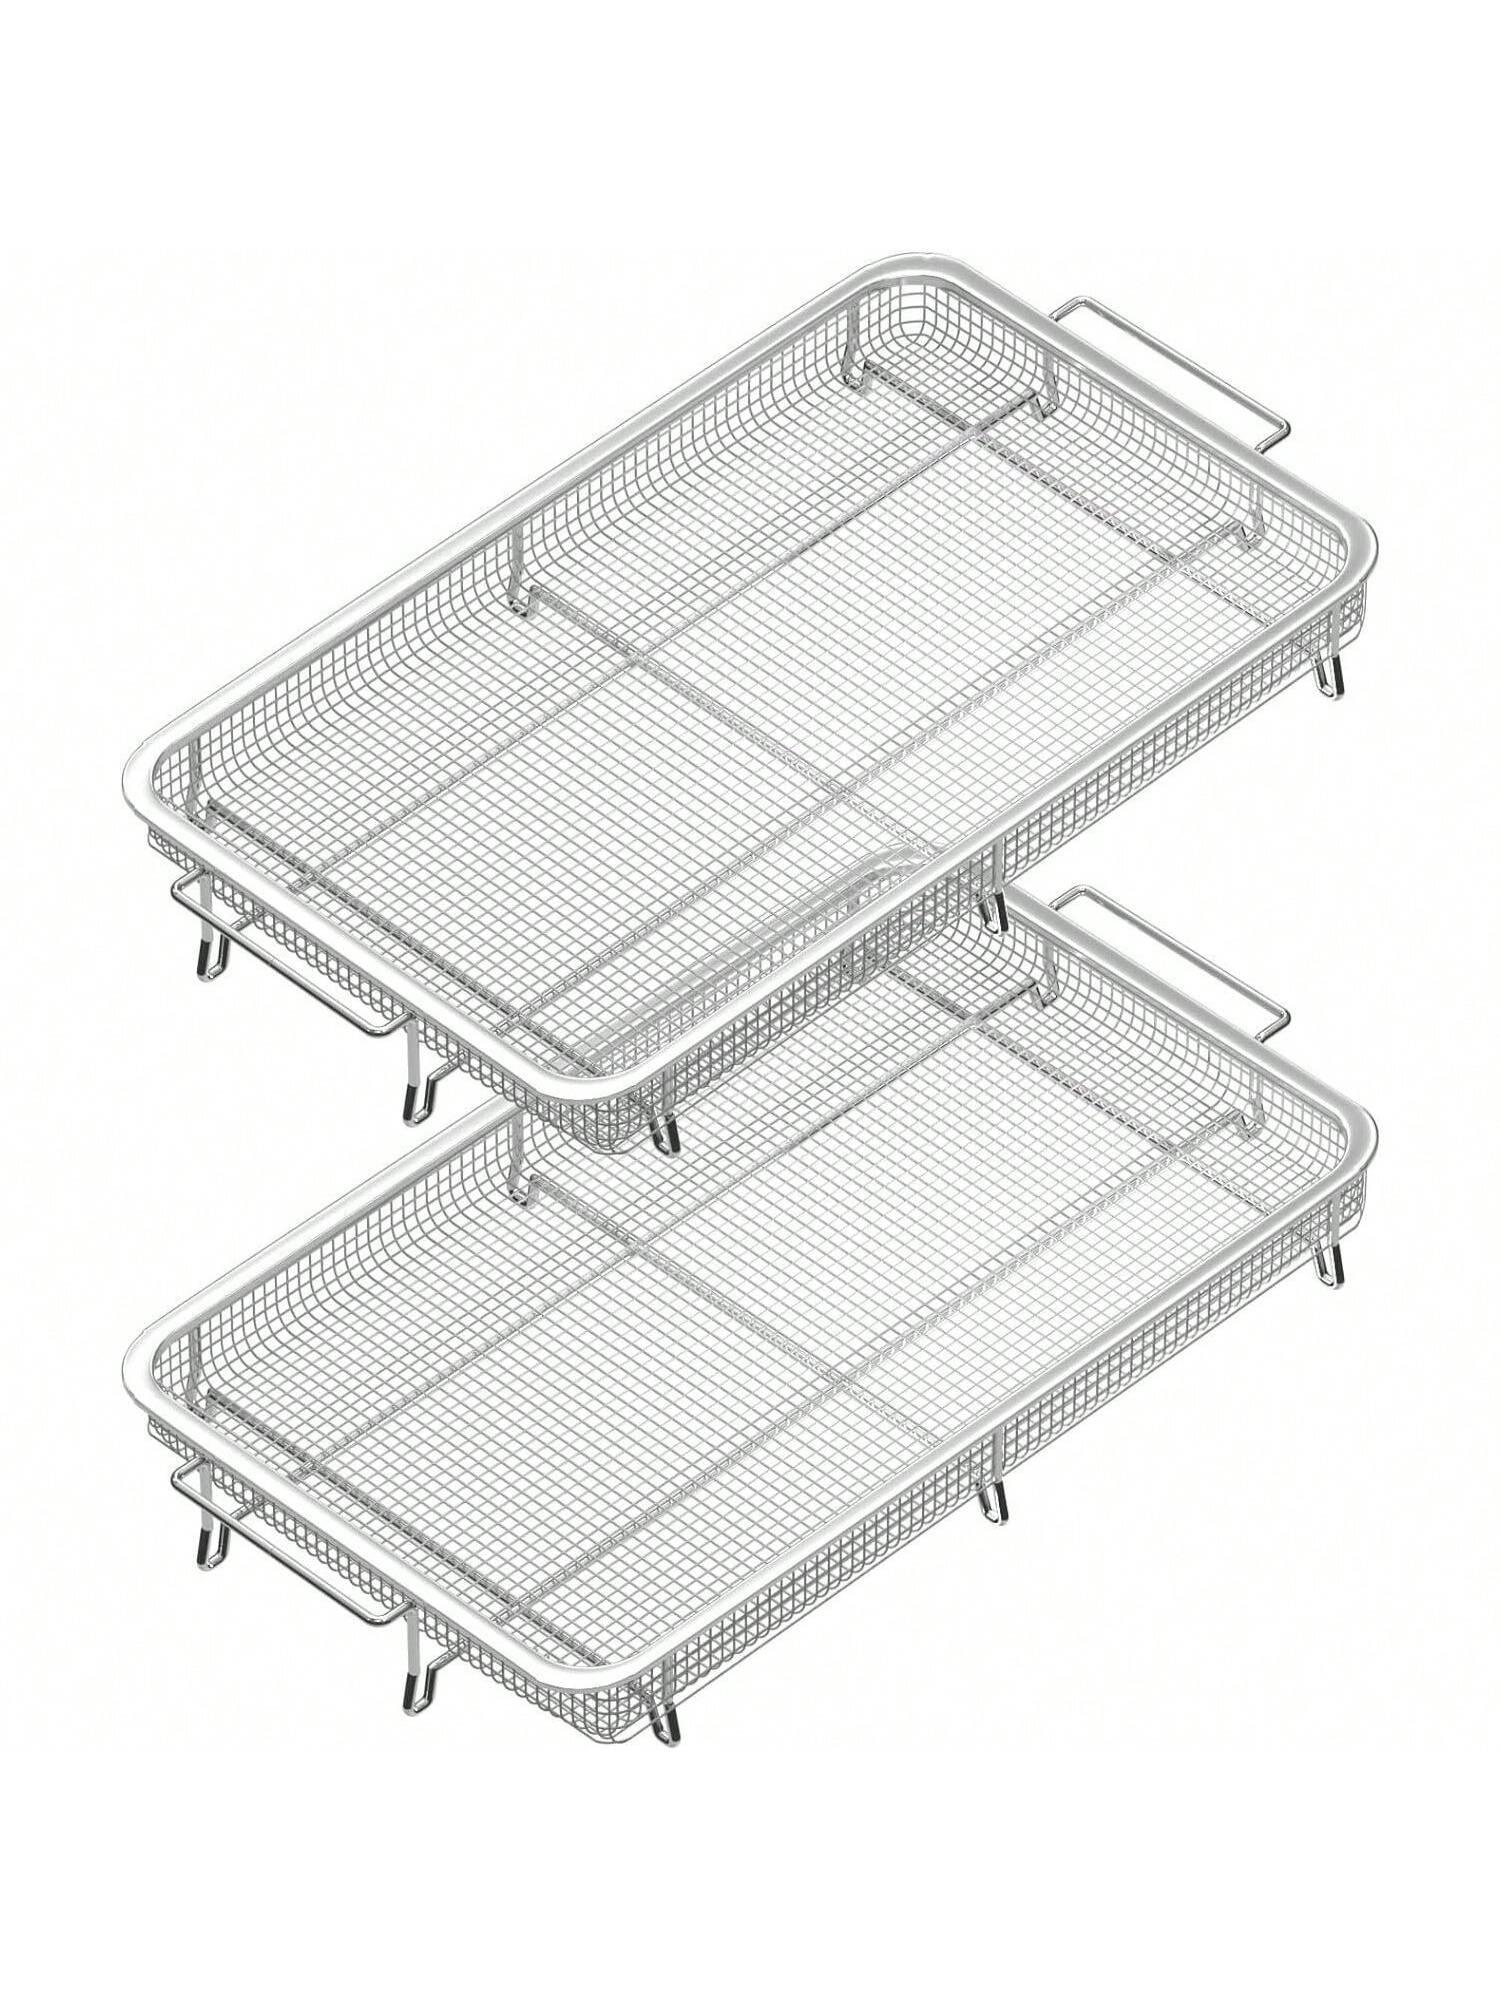 Stainless Steel Basket for Oven, Crisper Tray and Basket for Oven